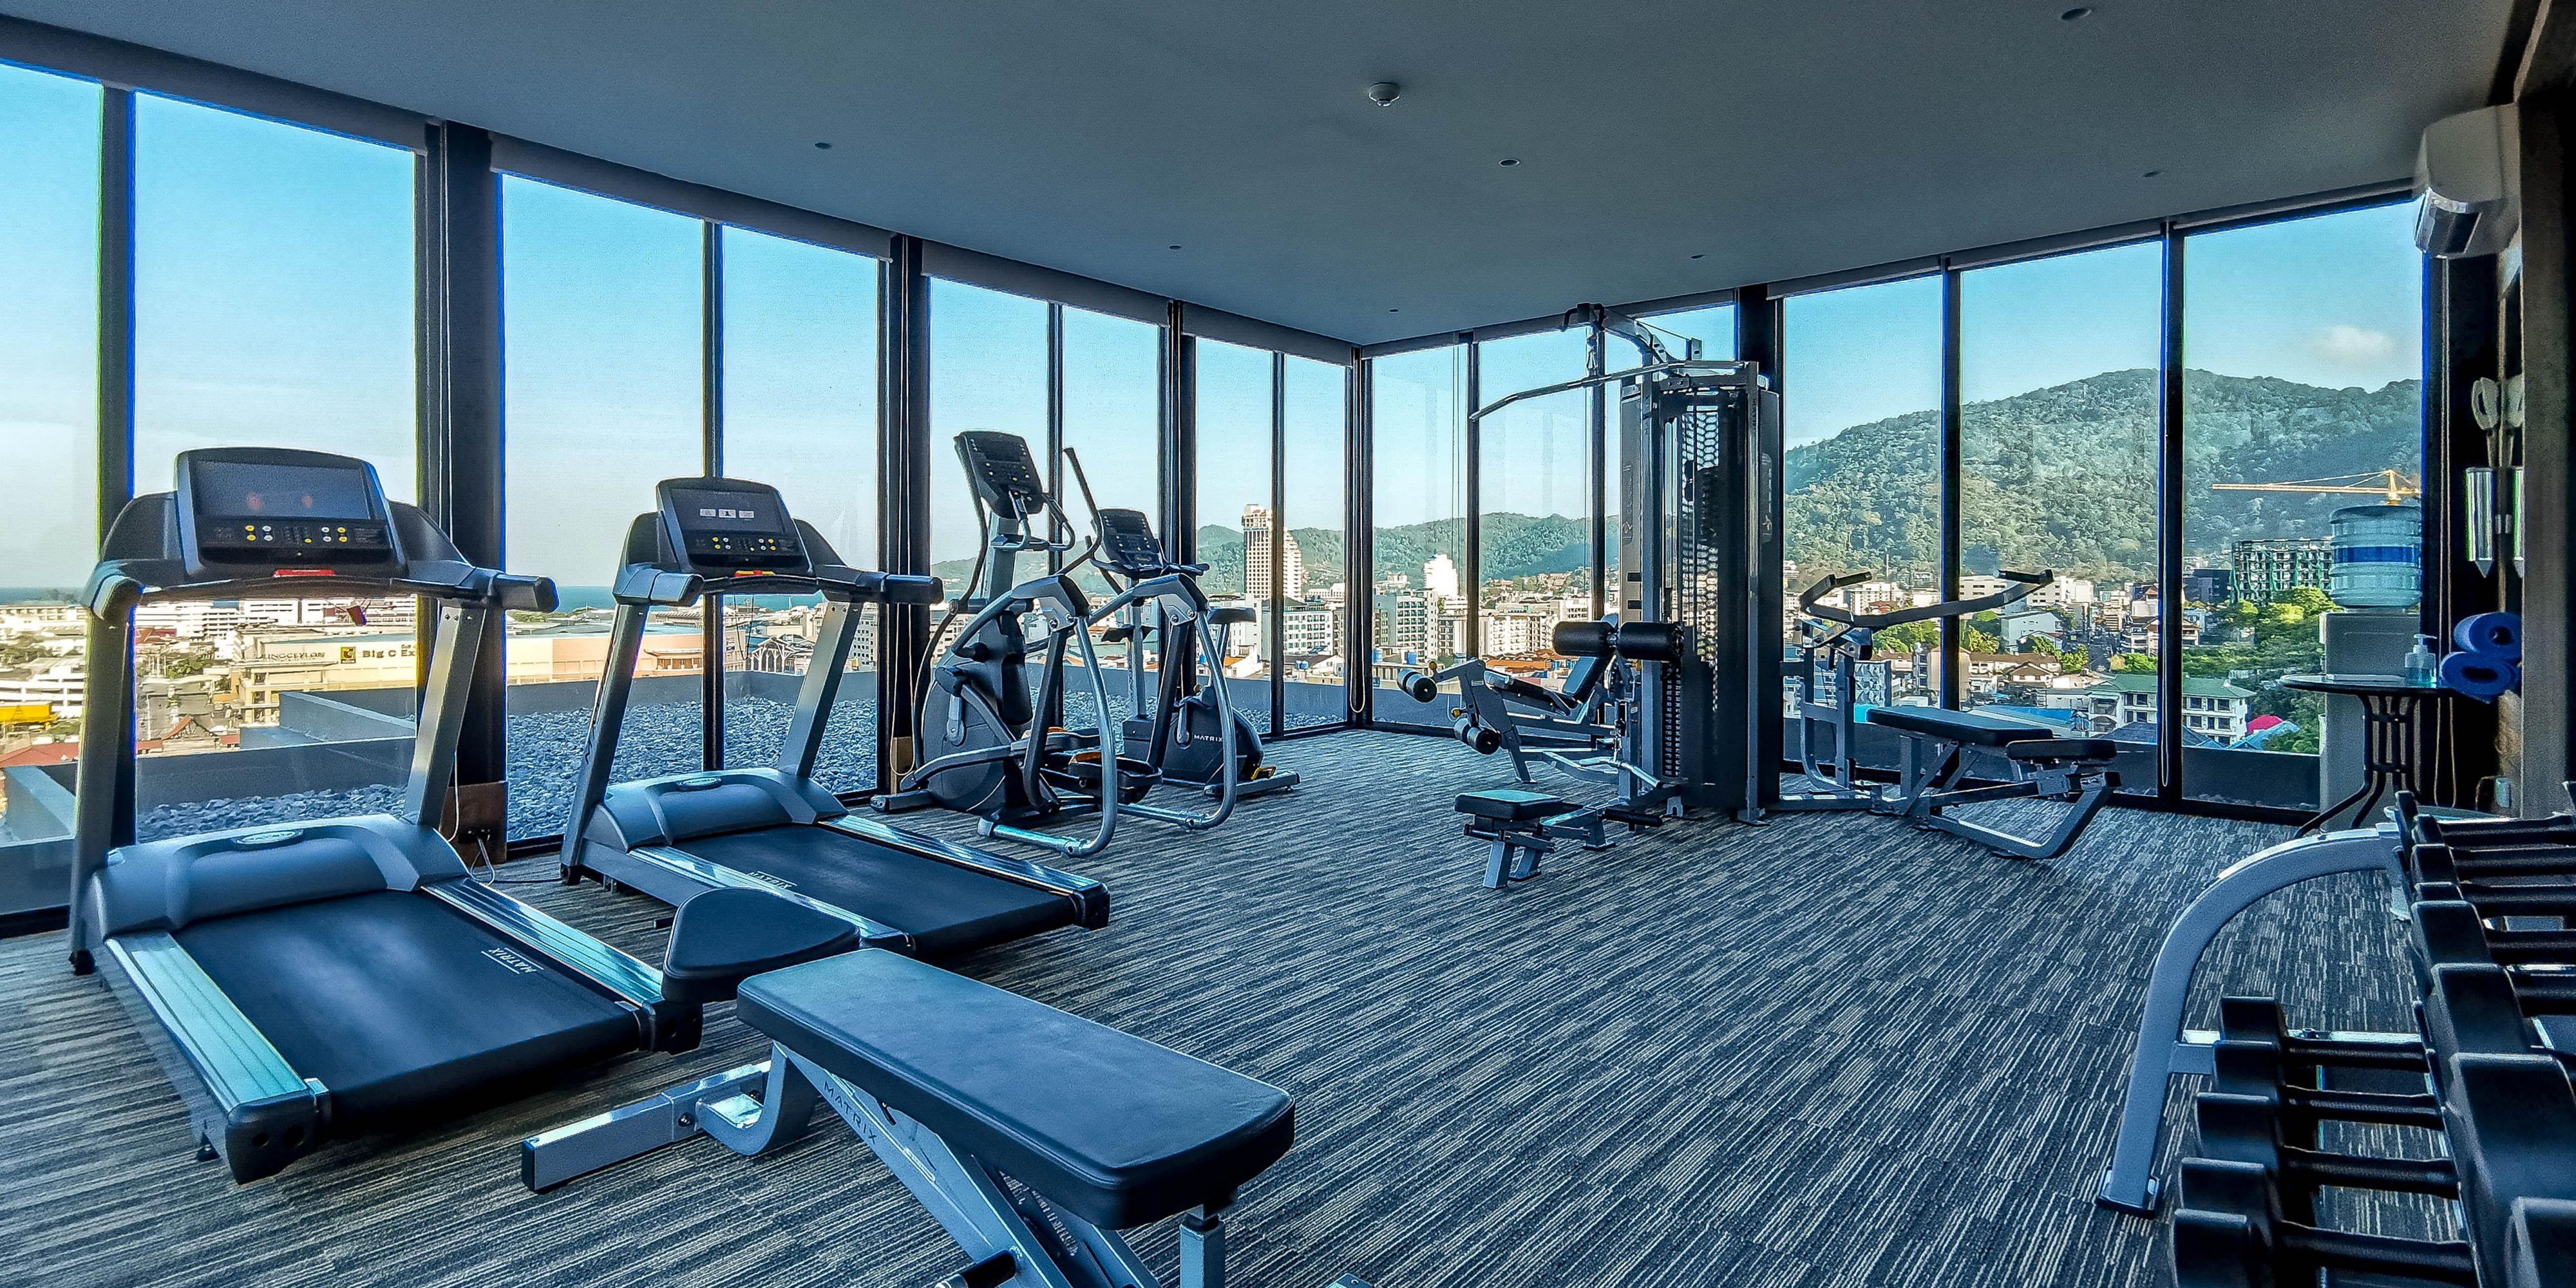 From our fitness centre, you can enjoy views of Patong while working out. Open daily from morning until evening, it has what you need to get into shape - from treadmills to machines for weightlifting, dumbbells and even yoga mats - so that you can work out in a comfortable environment.